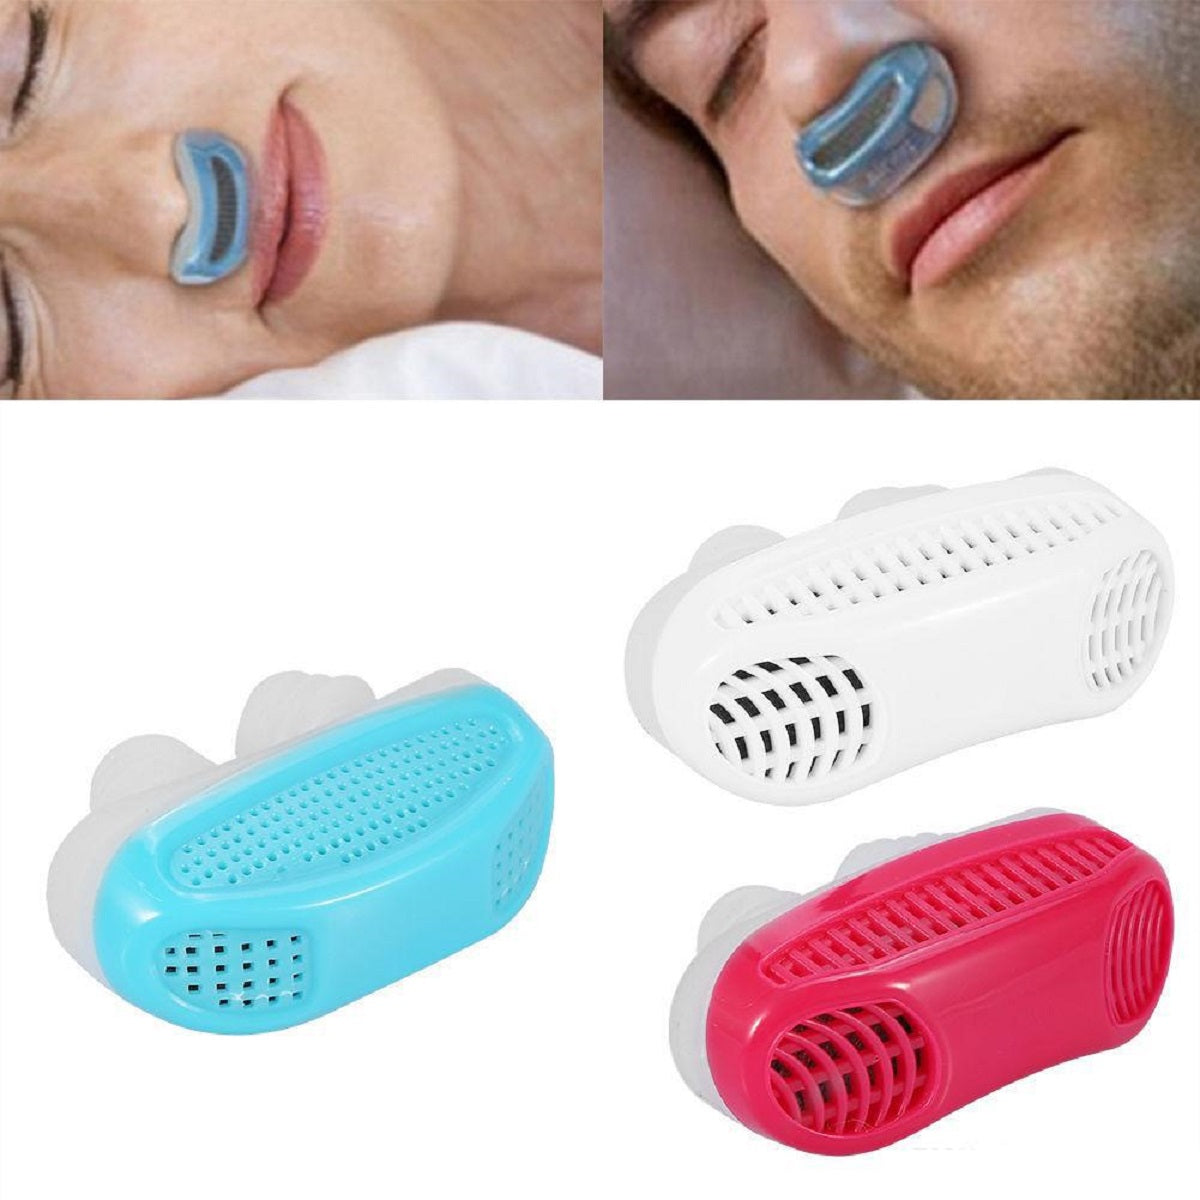 Anti-Snoring Sleep Apnea Nasal Device with Protective Case - Assorted Colors